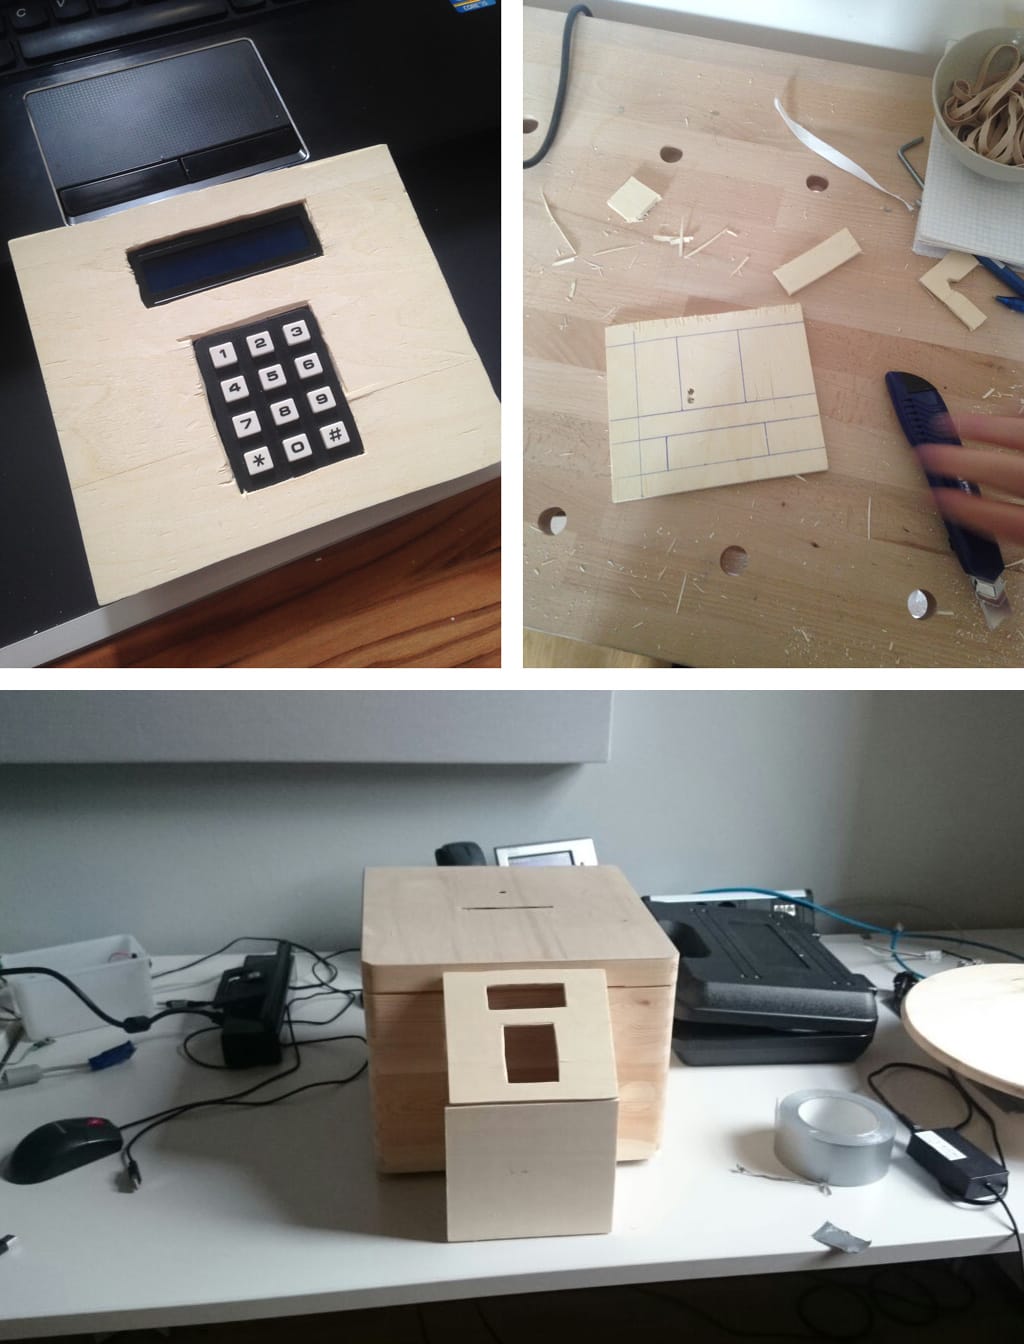 Three photos of a wooden box with a number keypad being assembled into a robot-like contraption